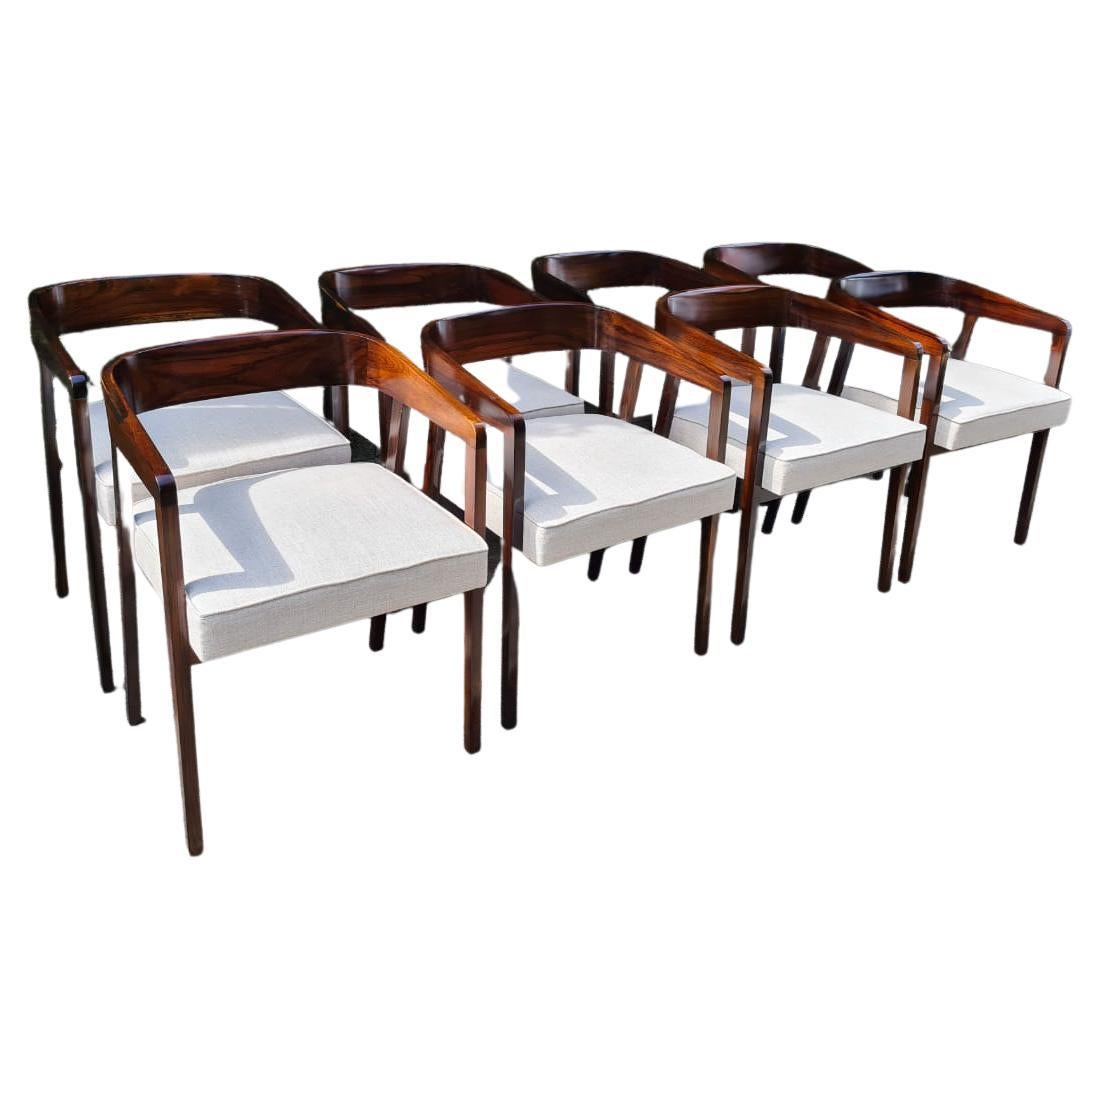 Set of 8 "U" Dining Chair, Rarest Version For Sale